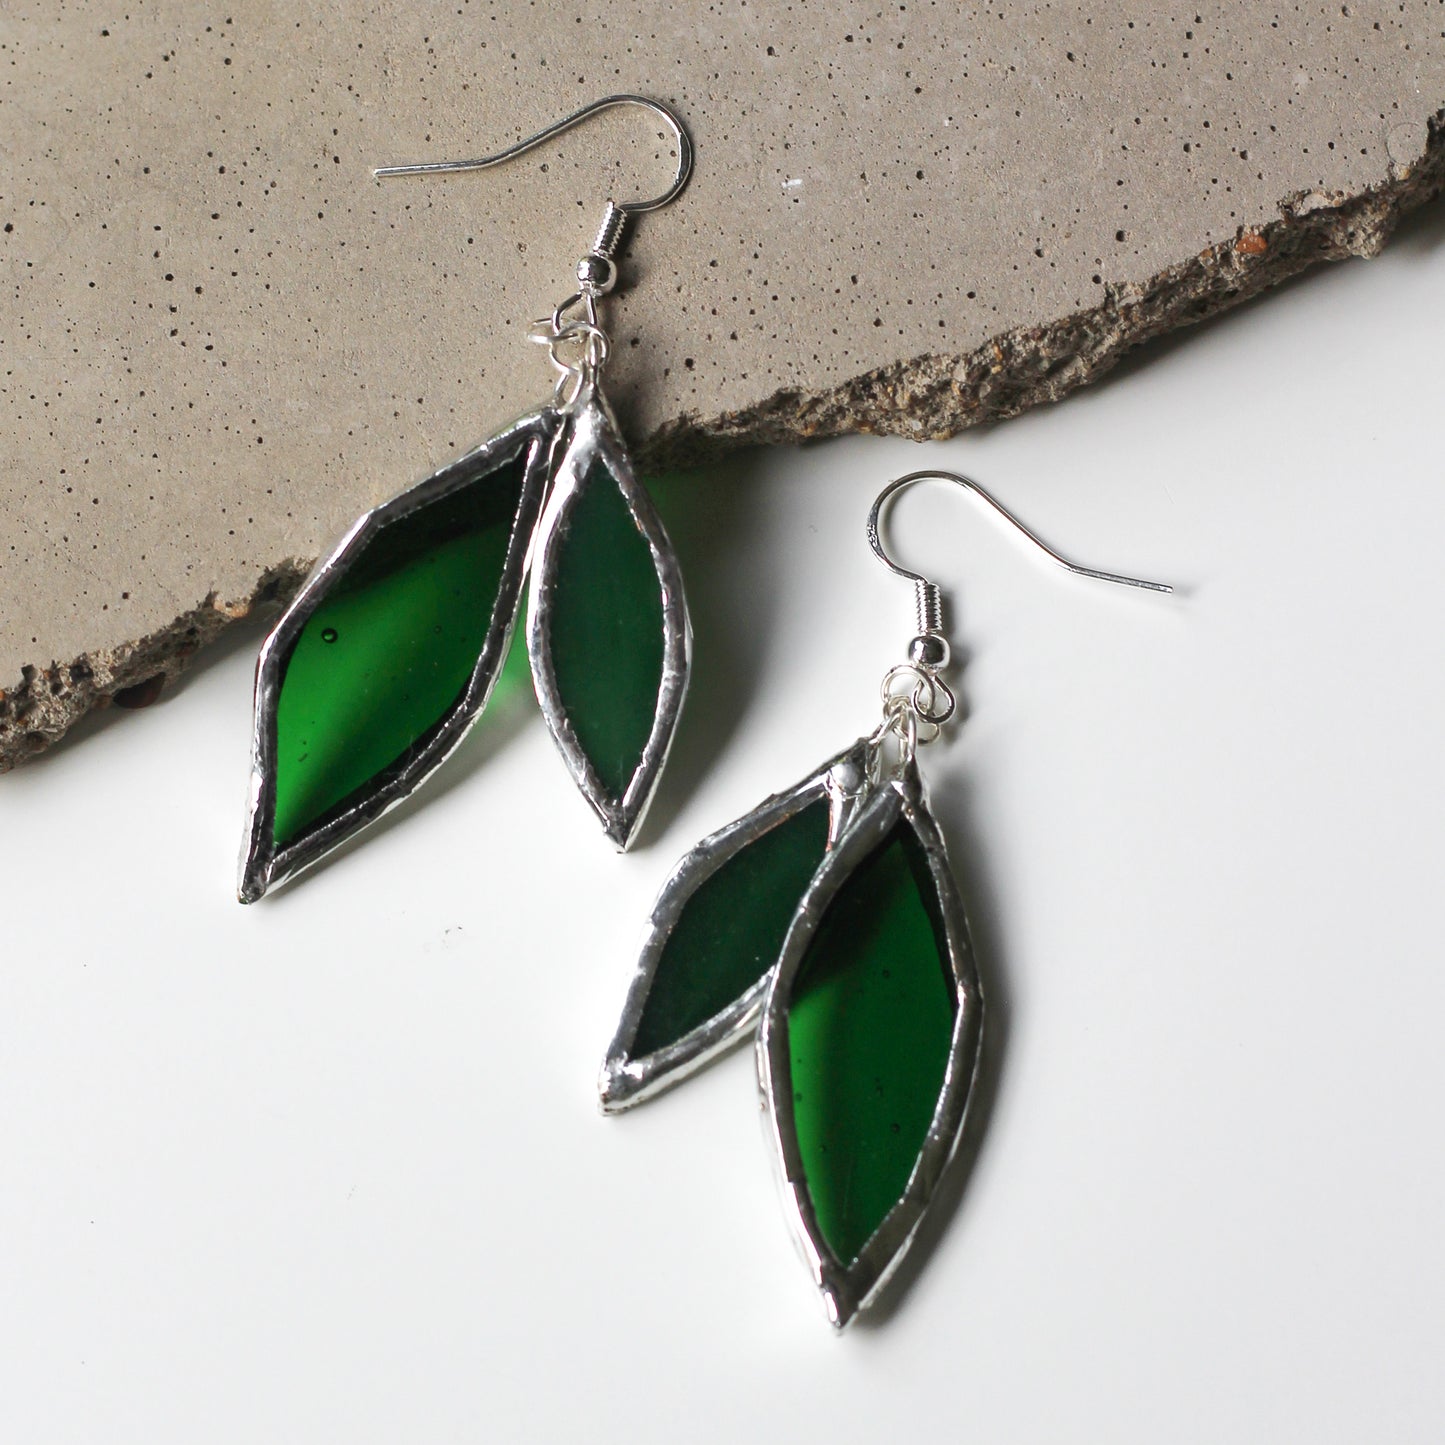 Stained glass Leaf Earrings